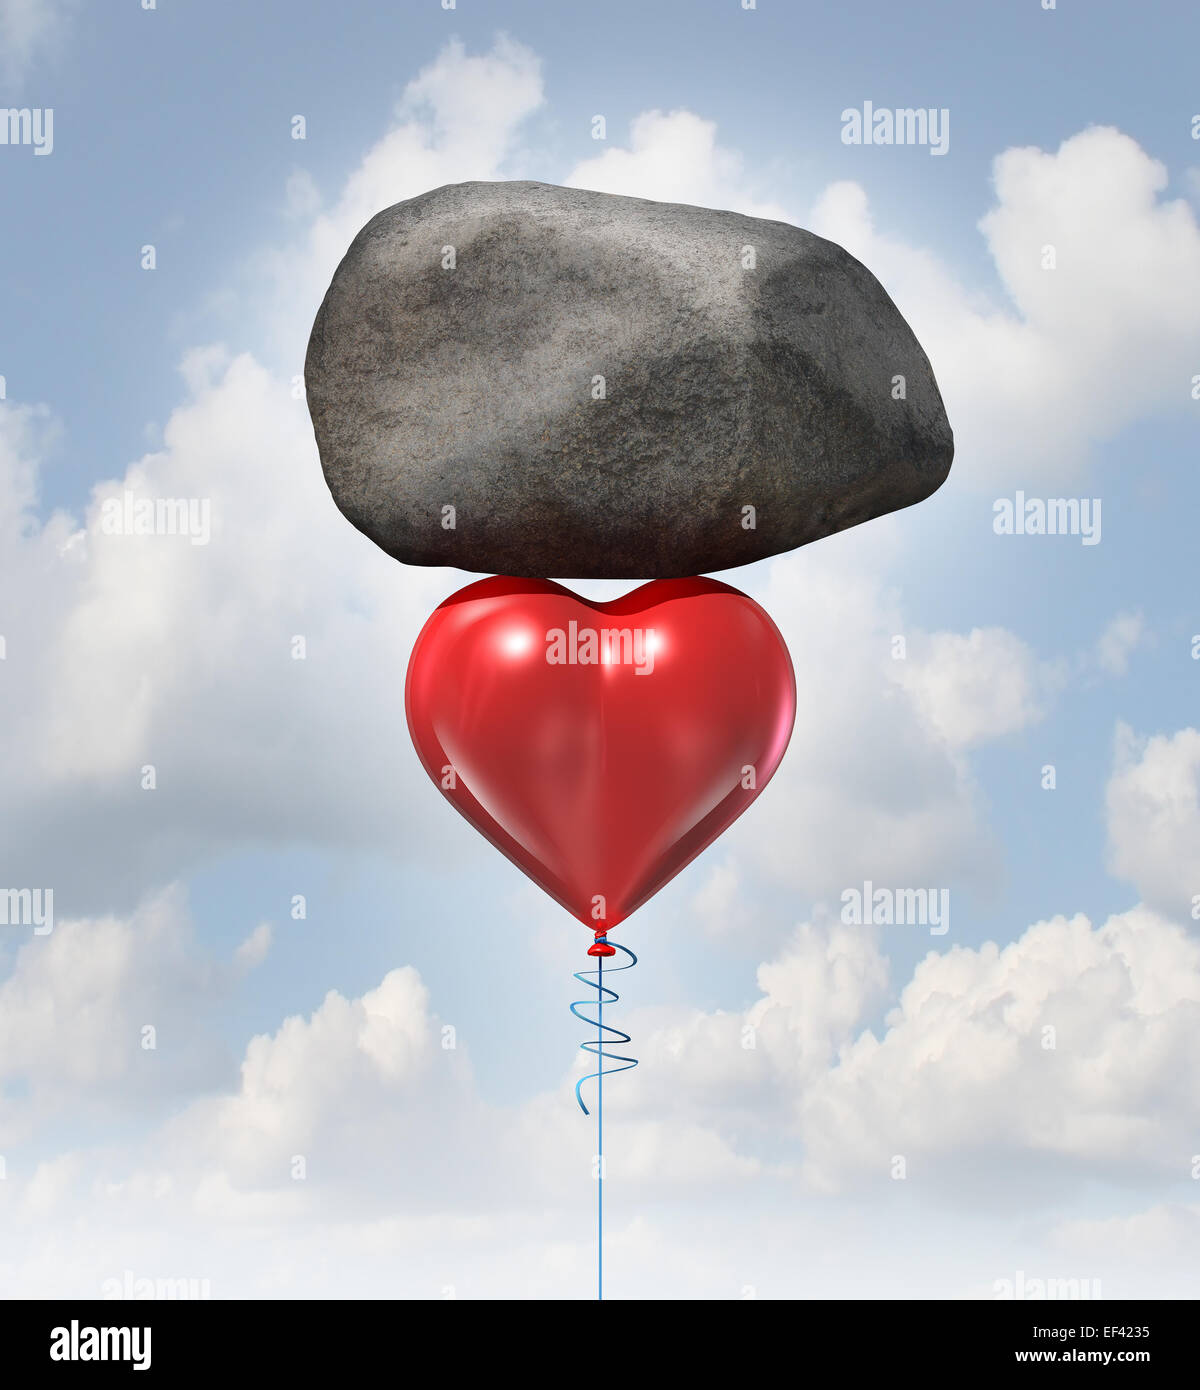 Power of love metaphor or heavy heart challenge concept as a red balloon shaped as the symbol for romance and relationships lift Stock Photo